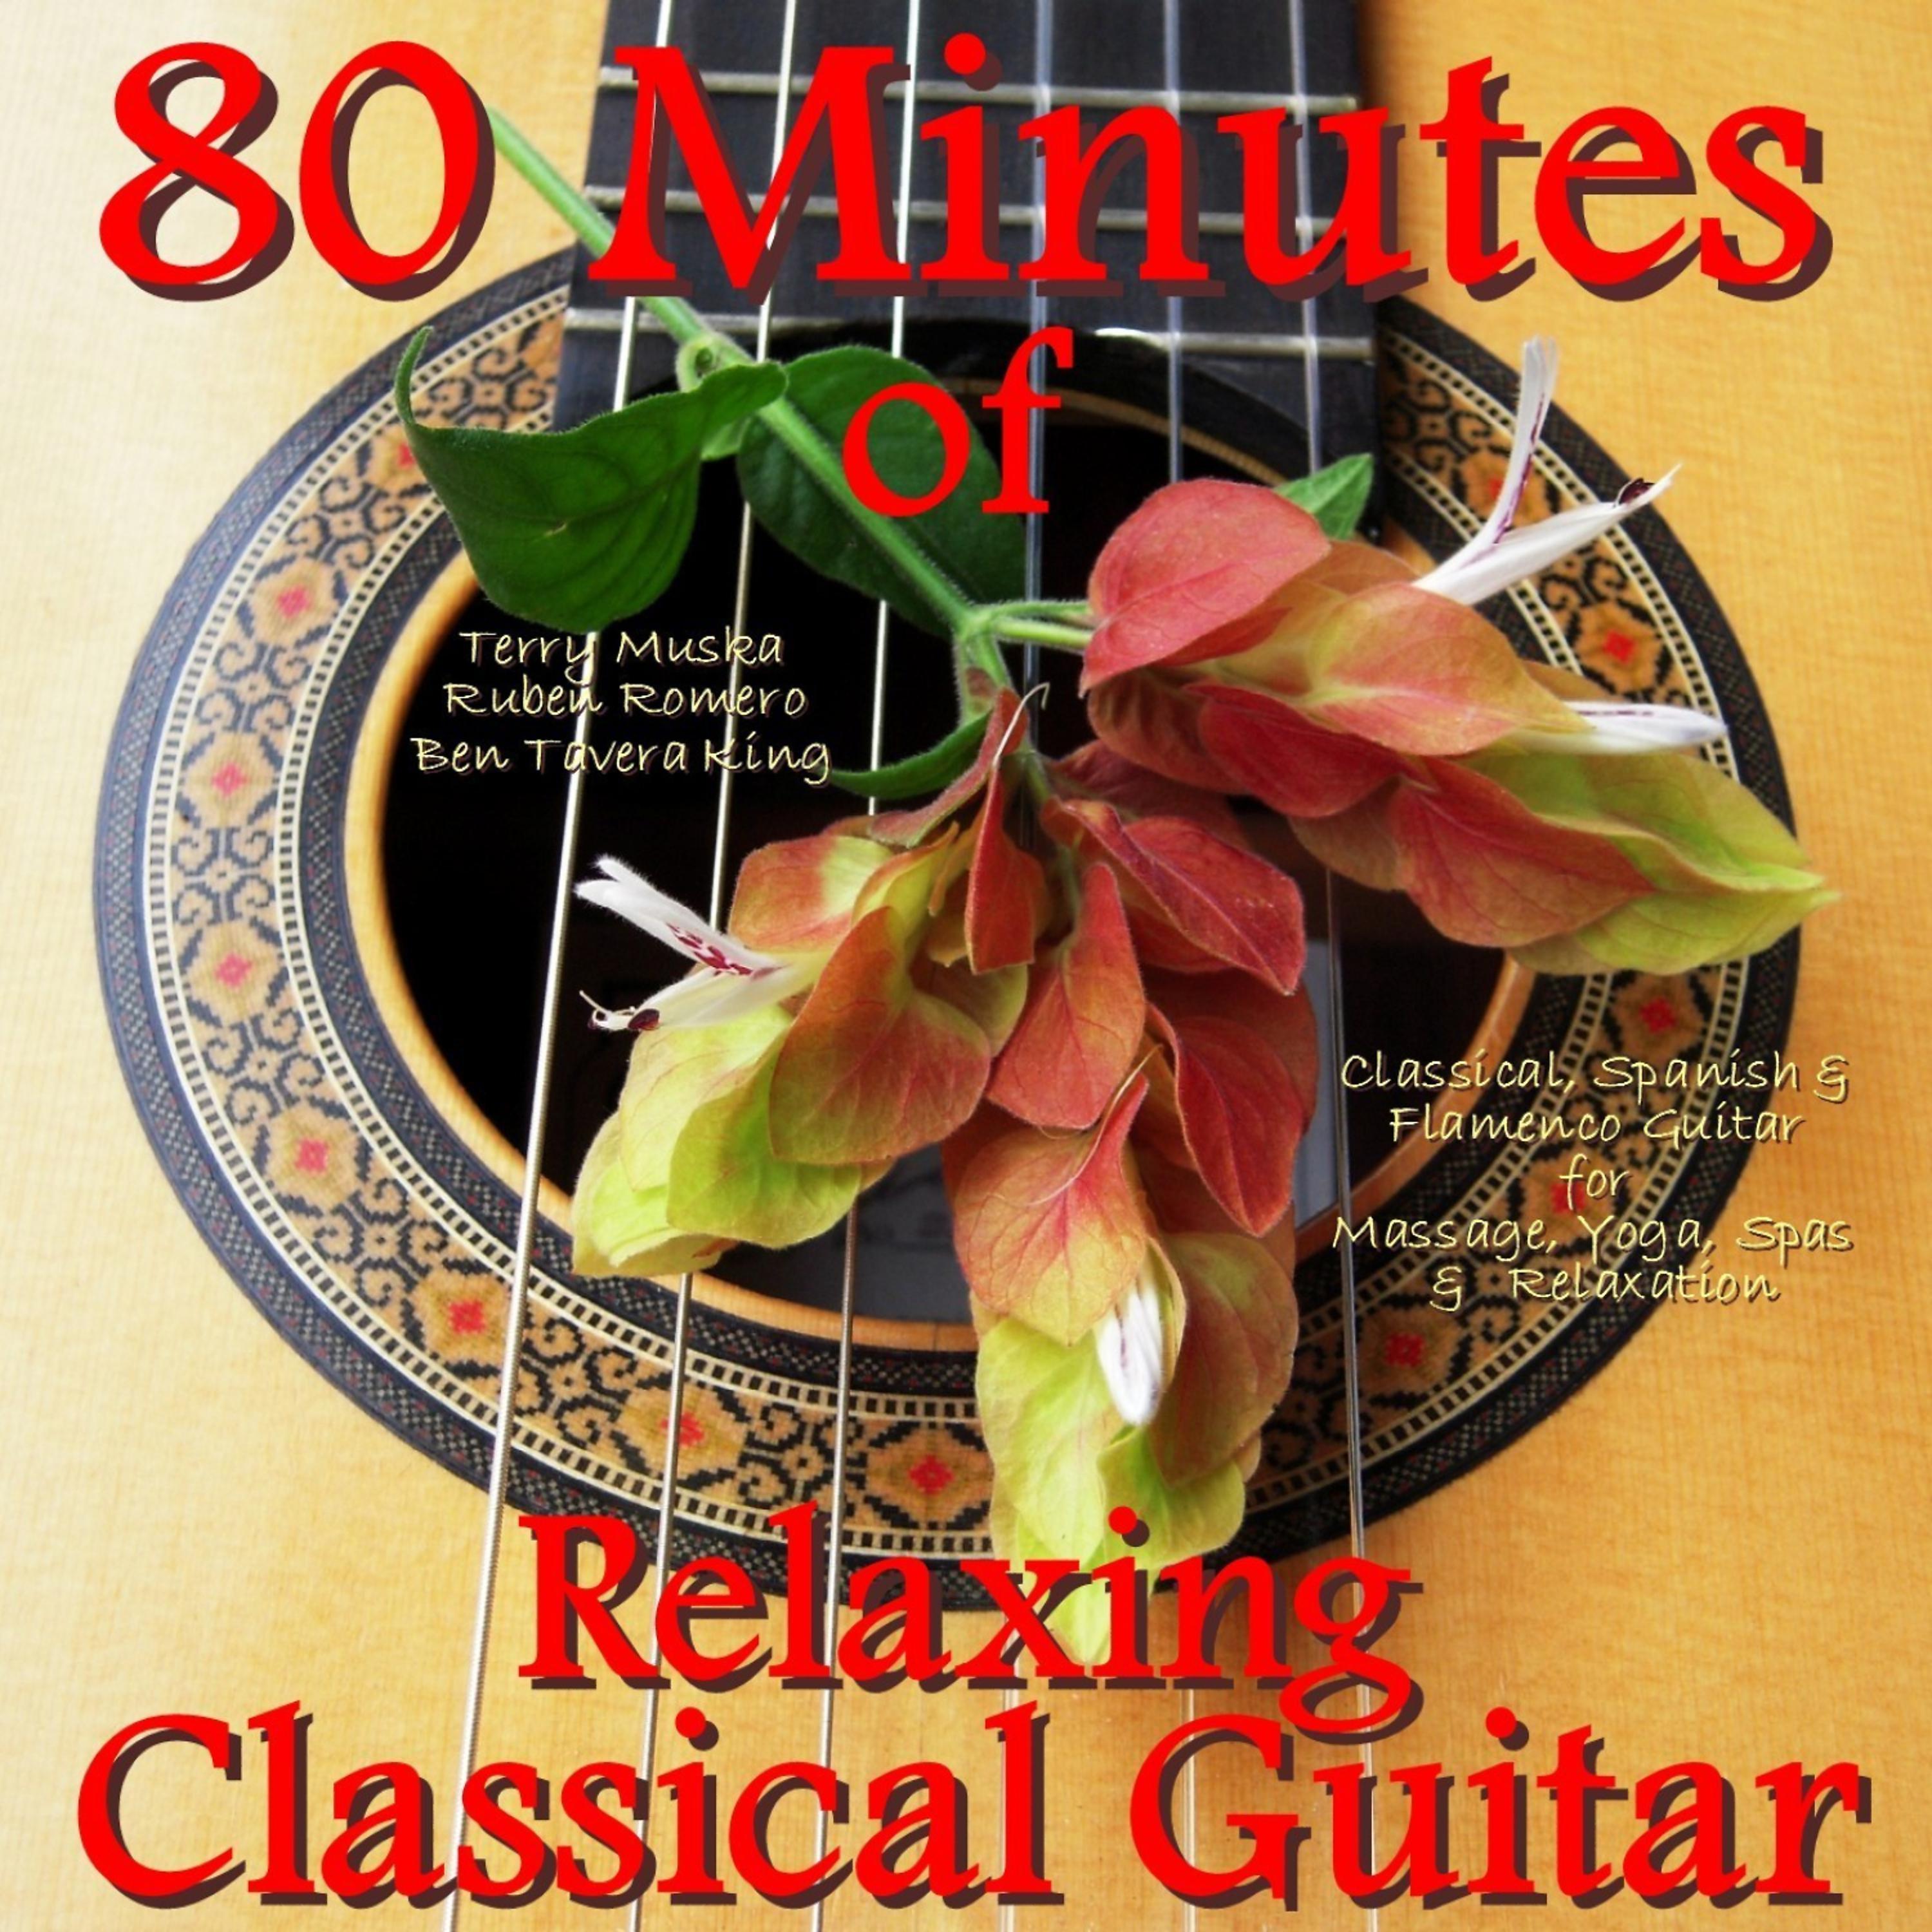 Постер альбома 80 Minutes of Relaxing Classical, Spanish & Flamenco Guitar (For Massage, Relaxation, New Age & Spas)